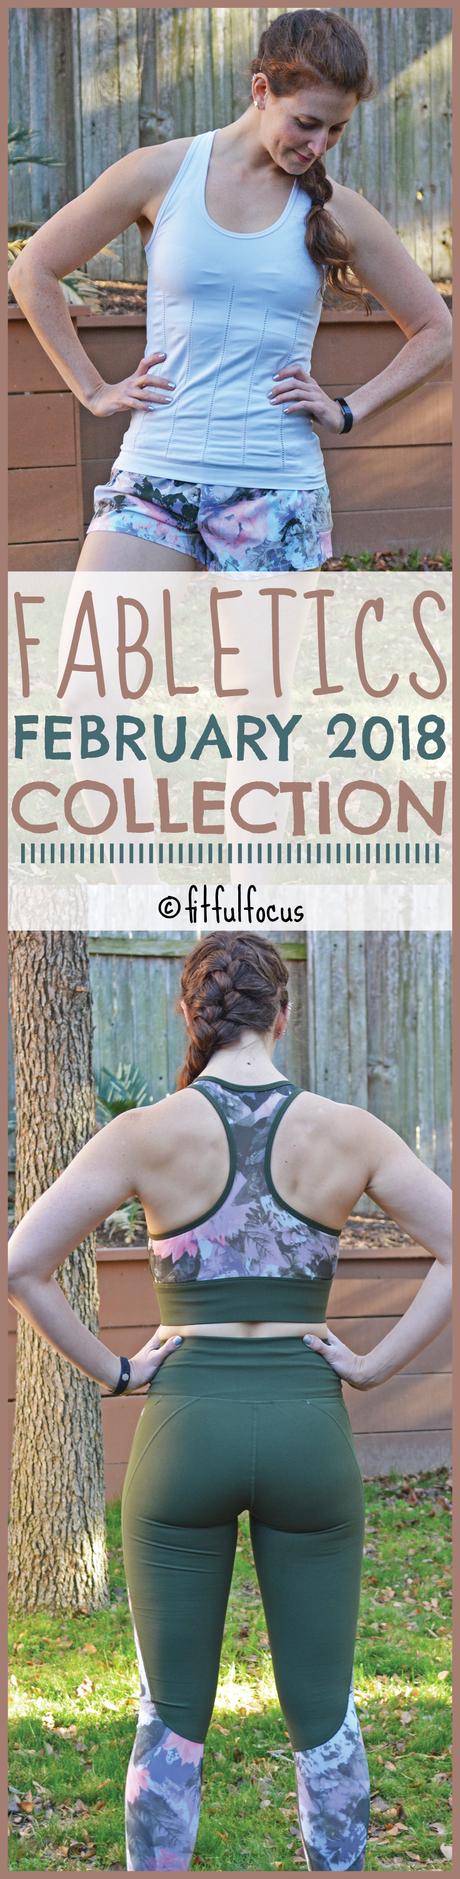 Fabletics February 2018 Collection